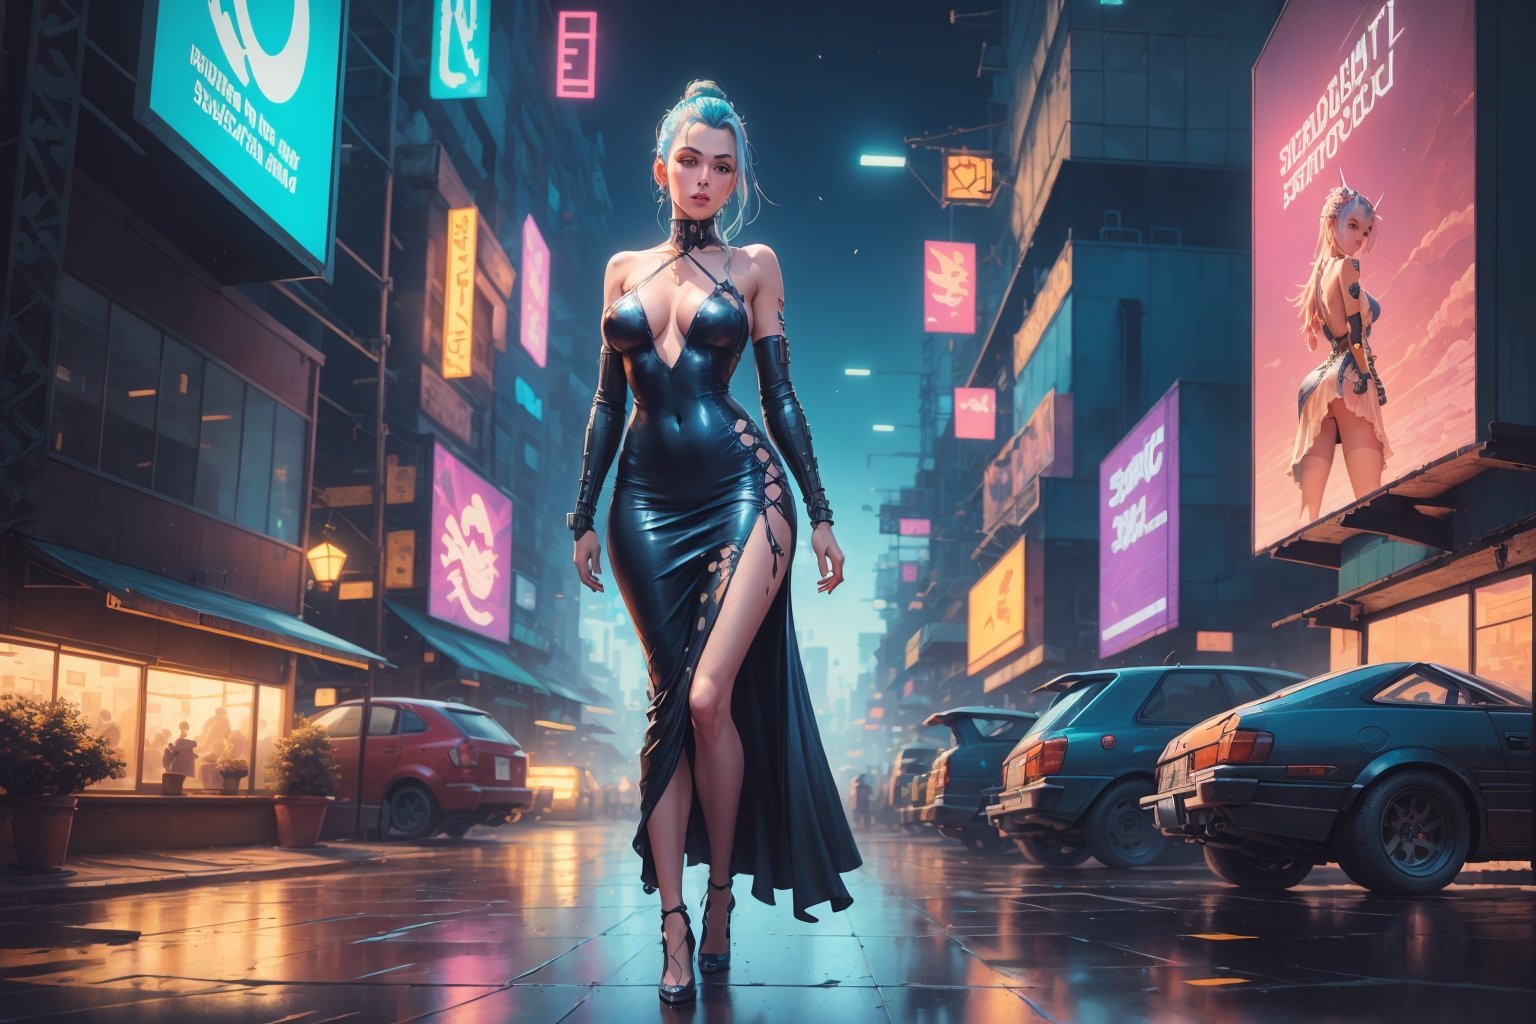 (4k), (masterpiece), (best quality),(extremely intricate), (realistic), (sharp focus), (cinematic lighting), (extremely detailed), ((sci-fi theme)), synthwave, cyberpunk

1girl, ((full-body)), waifu girl,   tight evening dress,  intricate details,  lots of hidden details,  looking at the viewer,  slender body,  high-quality manga art style,  painted by Studio Ghibli,  vibrant cyberpunk city in the background,  advertising signs,  synth-wave style,  high-quality anime art,